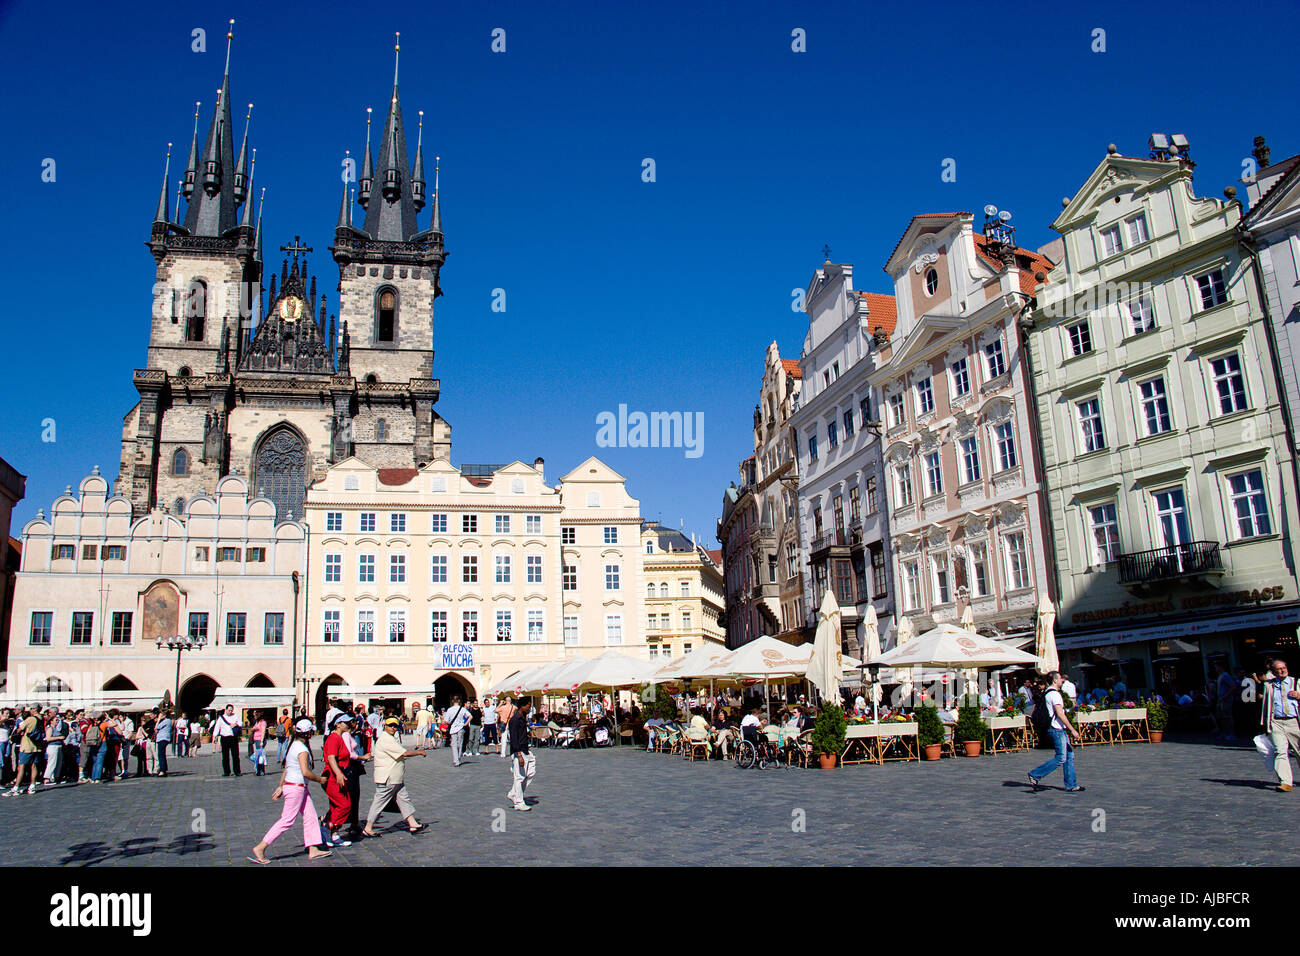 Czech Republic Czechia Bohemia Prague Old Town Square Front Of The Church Of Our Lady Before Tyn With Pedestrians Walking Across Stock Photo